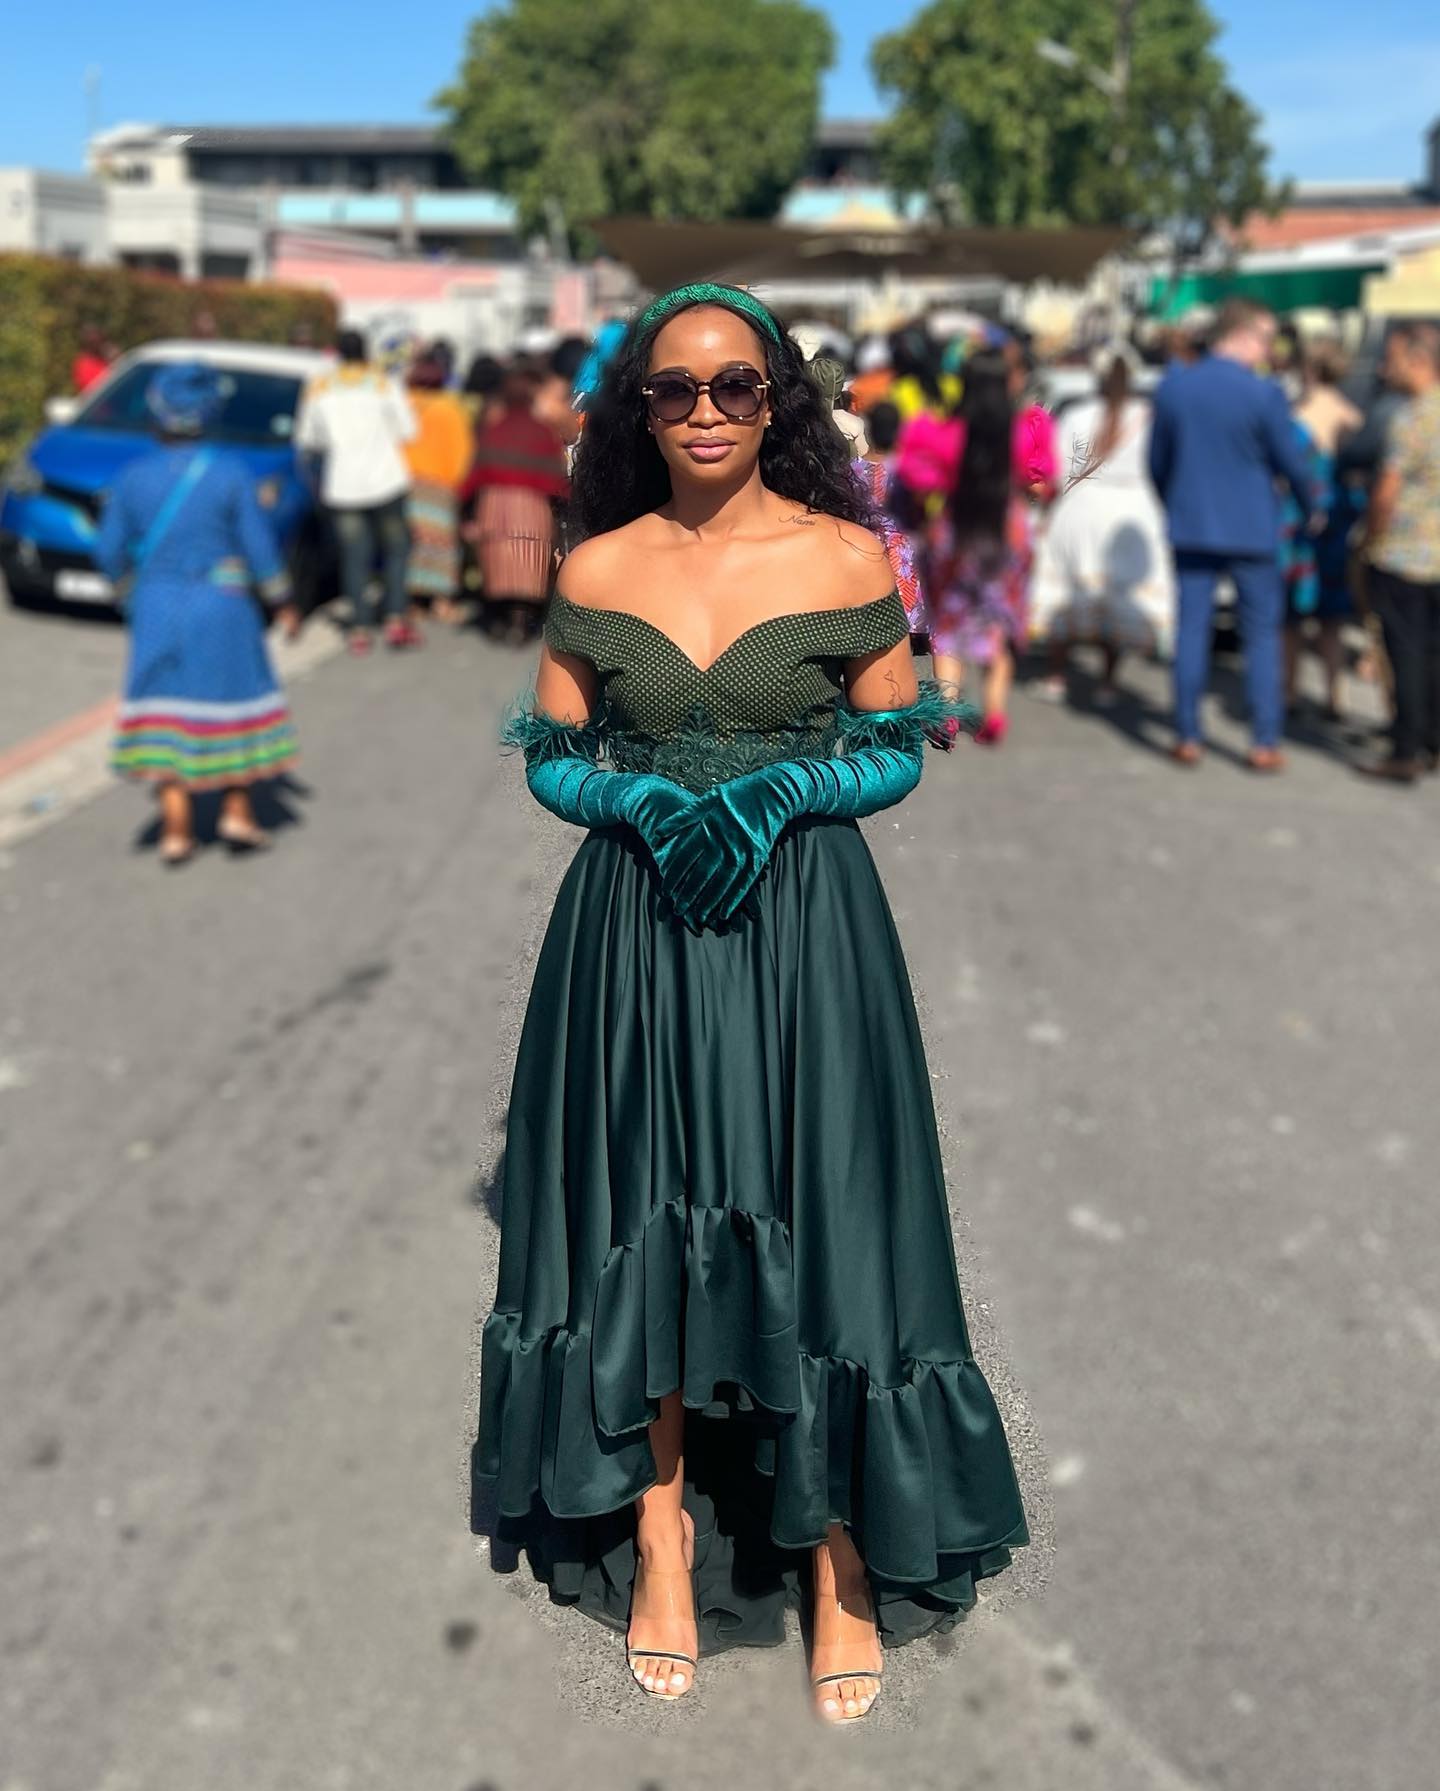 Dressed for Each Event: The Flexibility of the Tswana Dresses